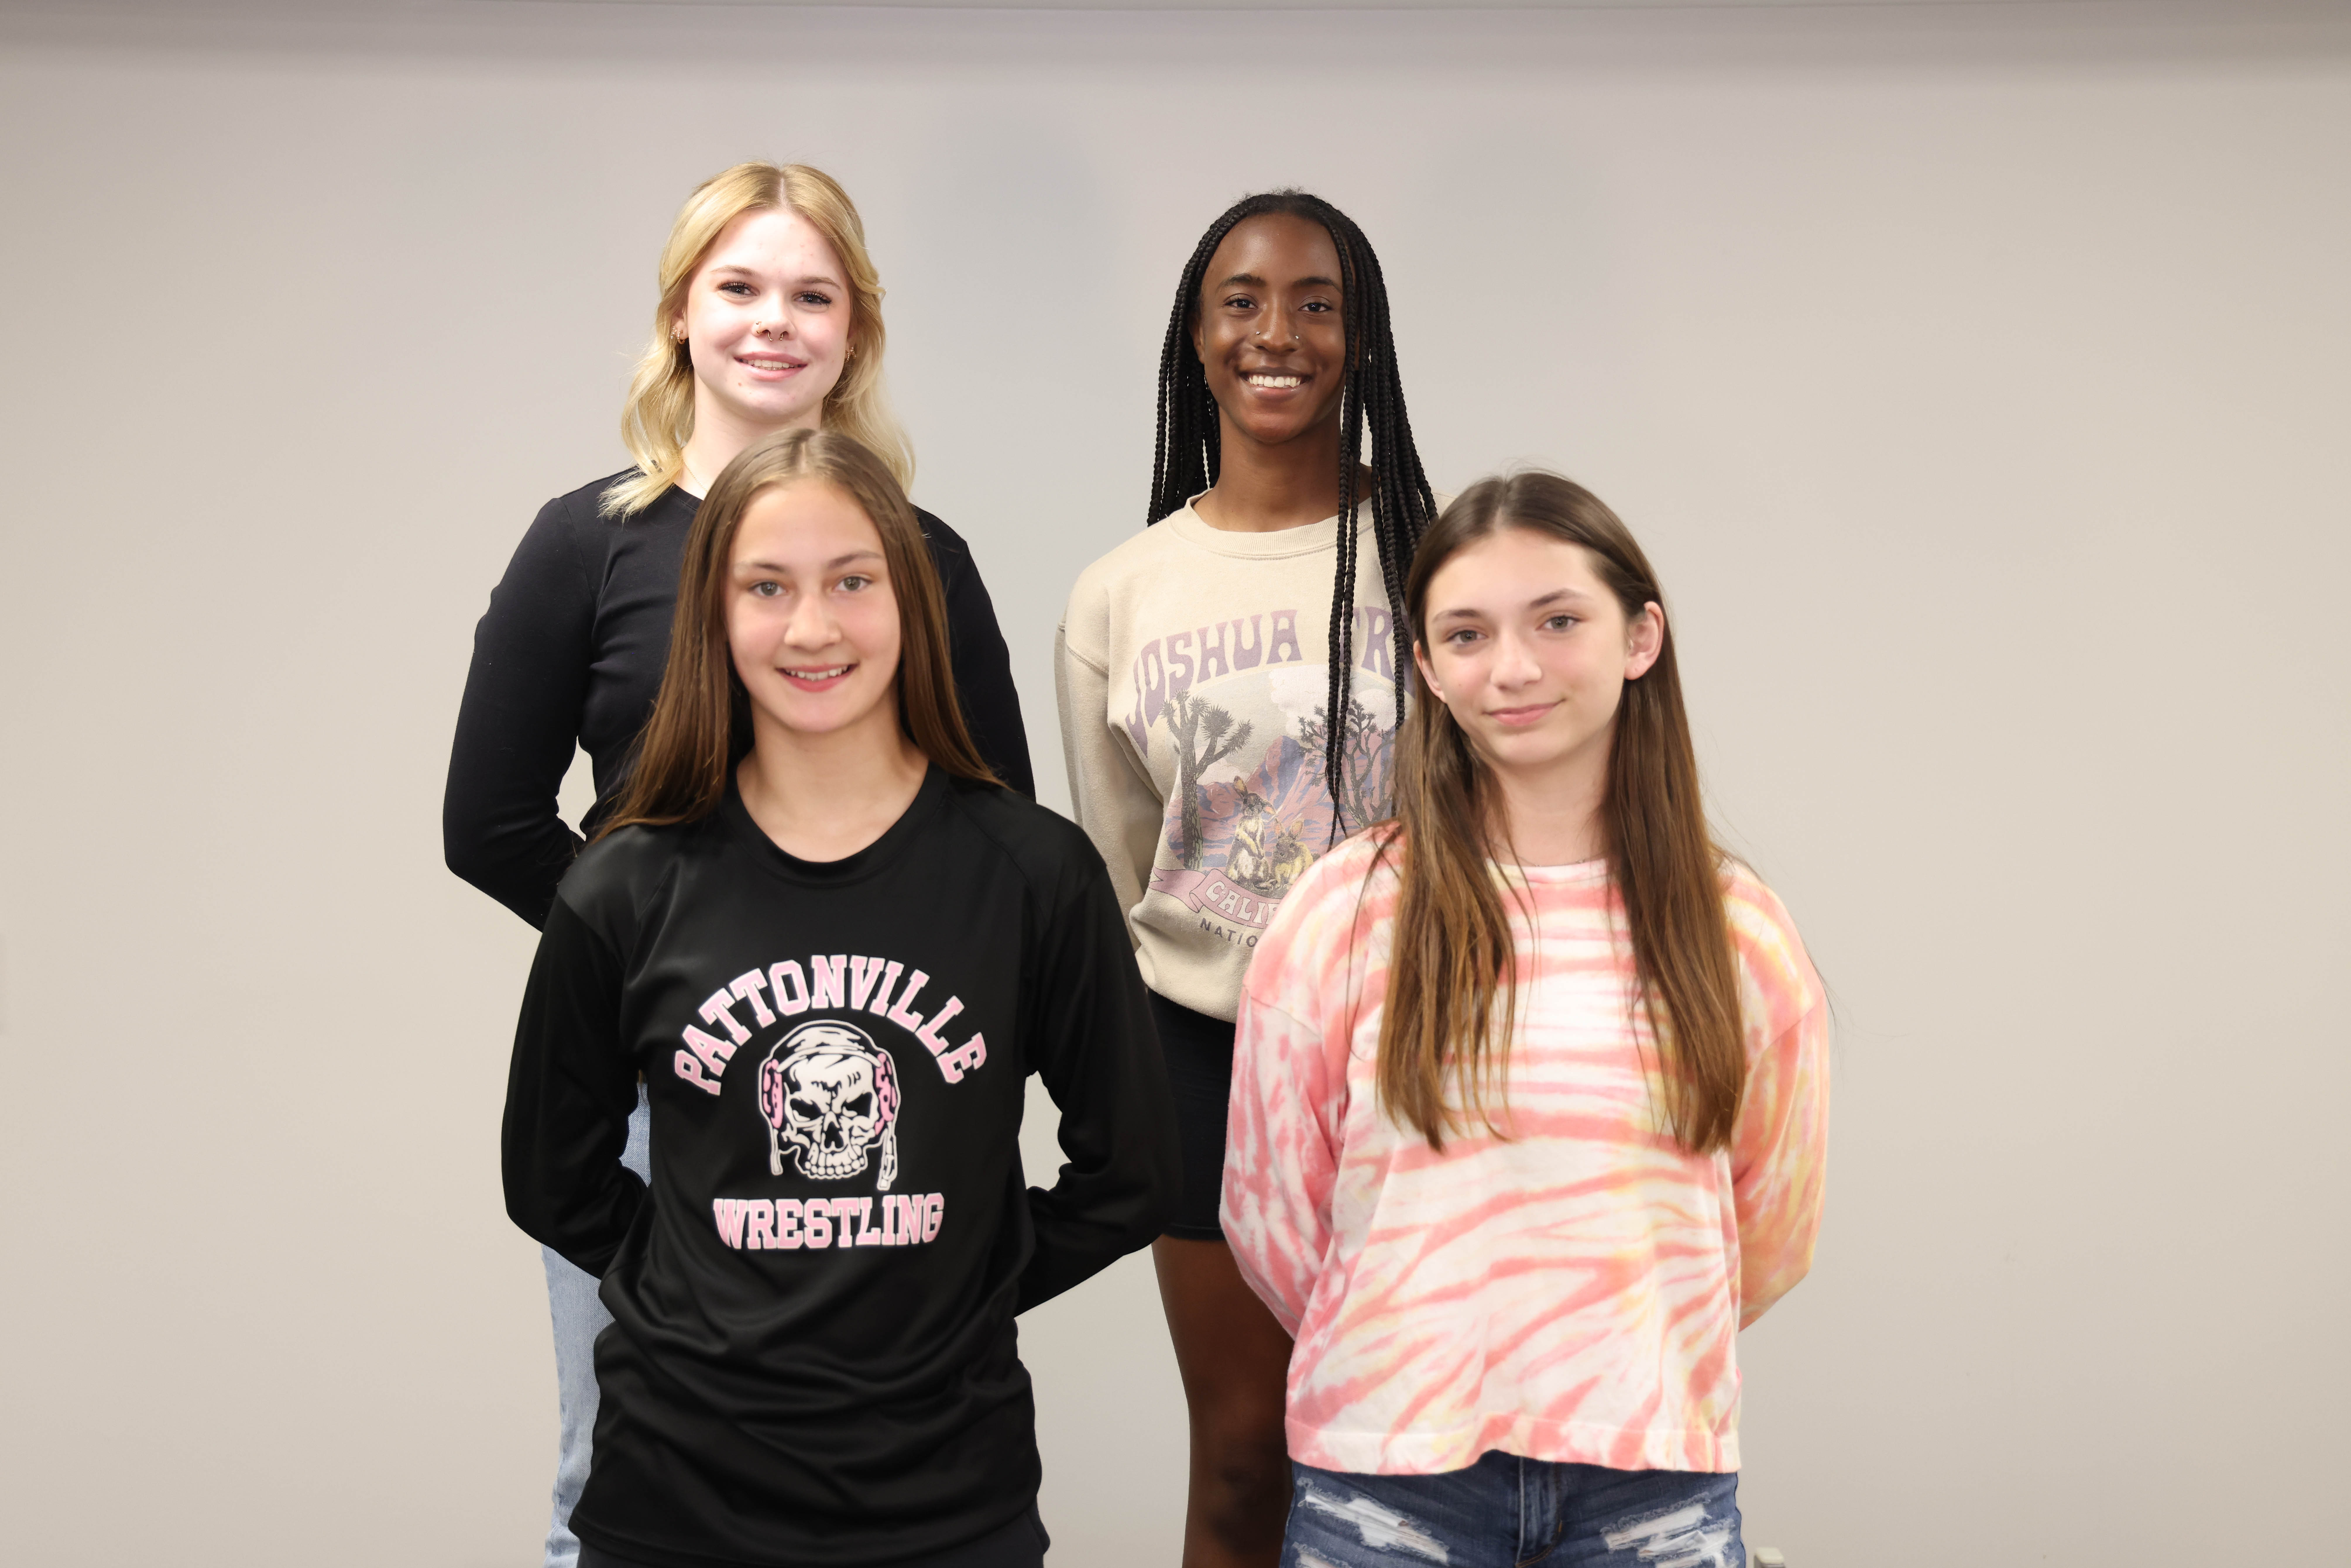 Members of the girls wrestling team pose for a photo.